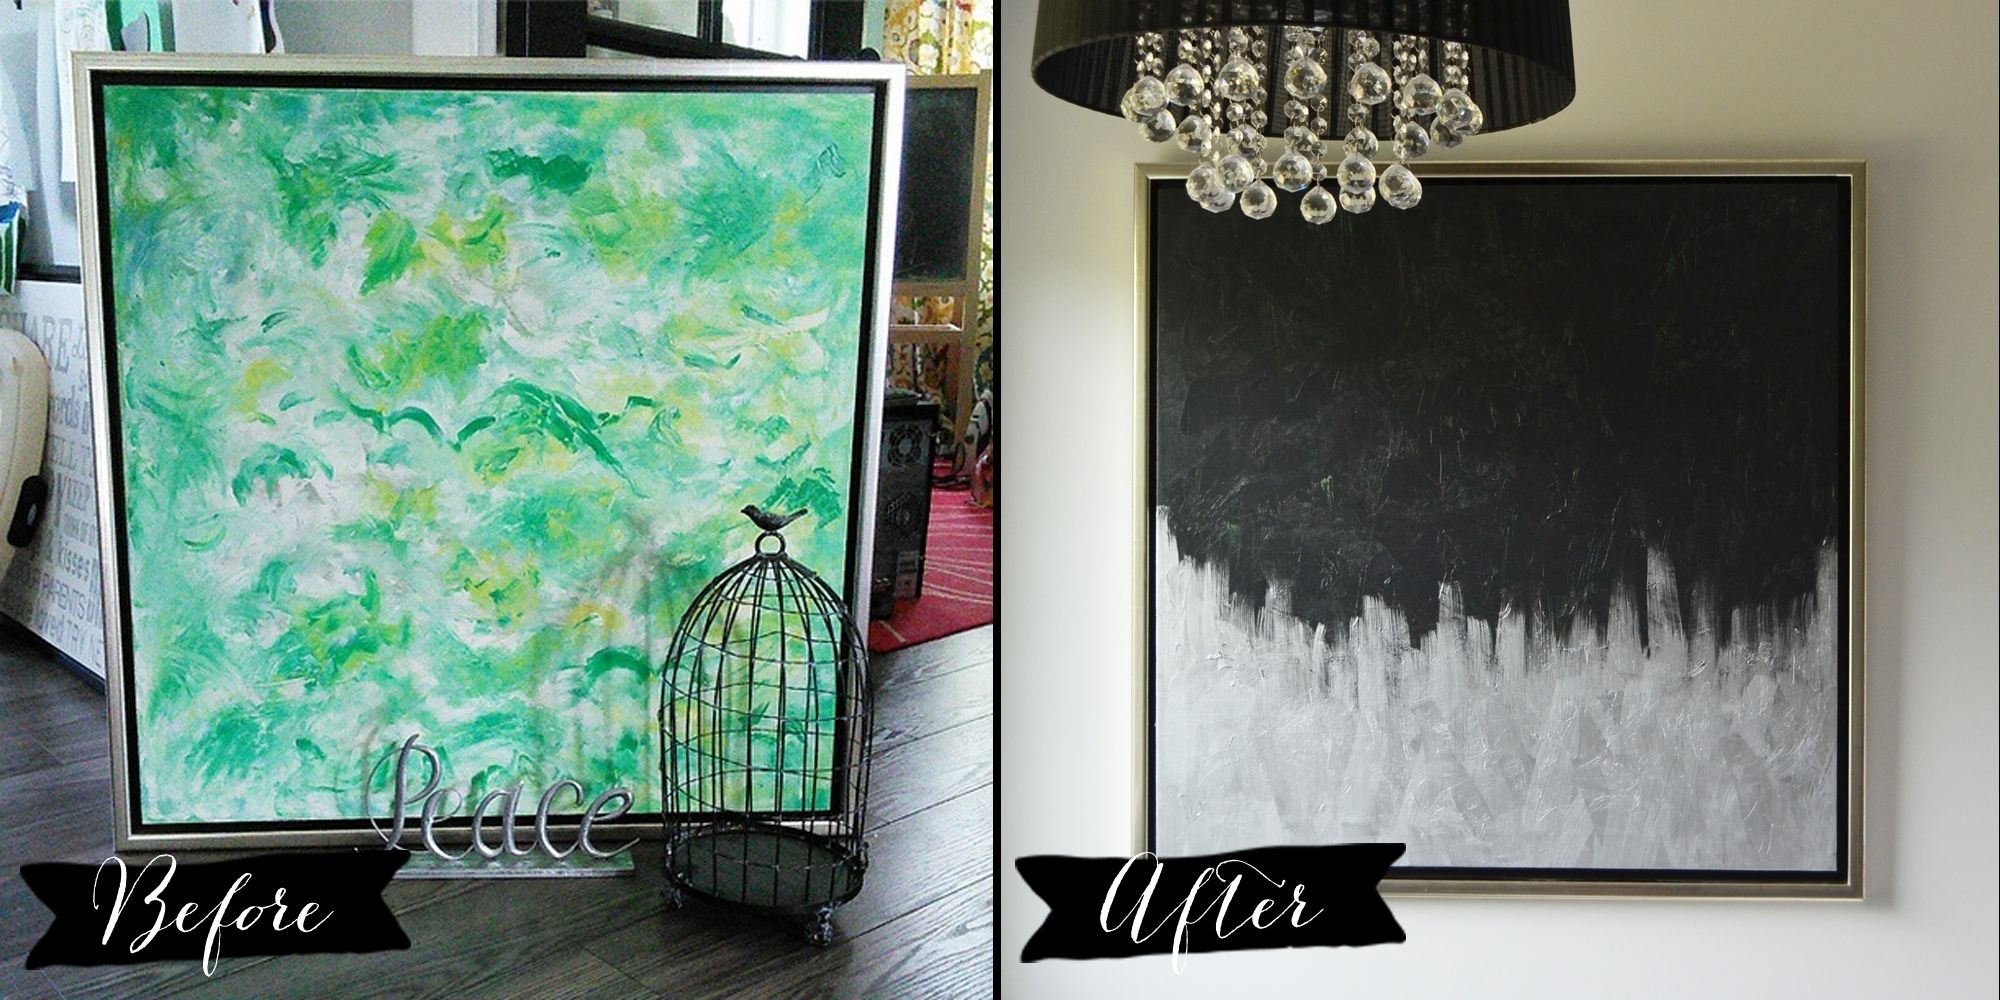 Make Modern Artwork From Thrift Store Canvas Art | The Diy Mommy Within Recent Giant Abstract Wall Art (View 12 of 20)